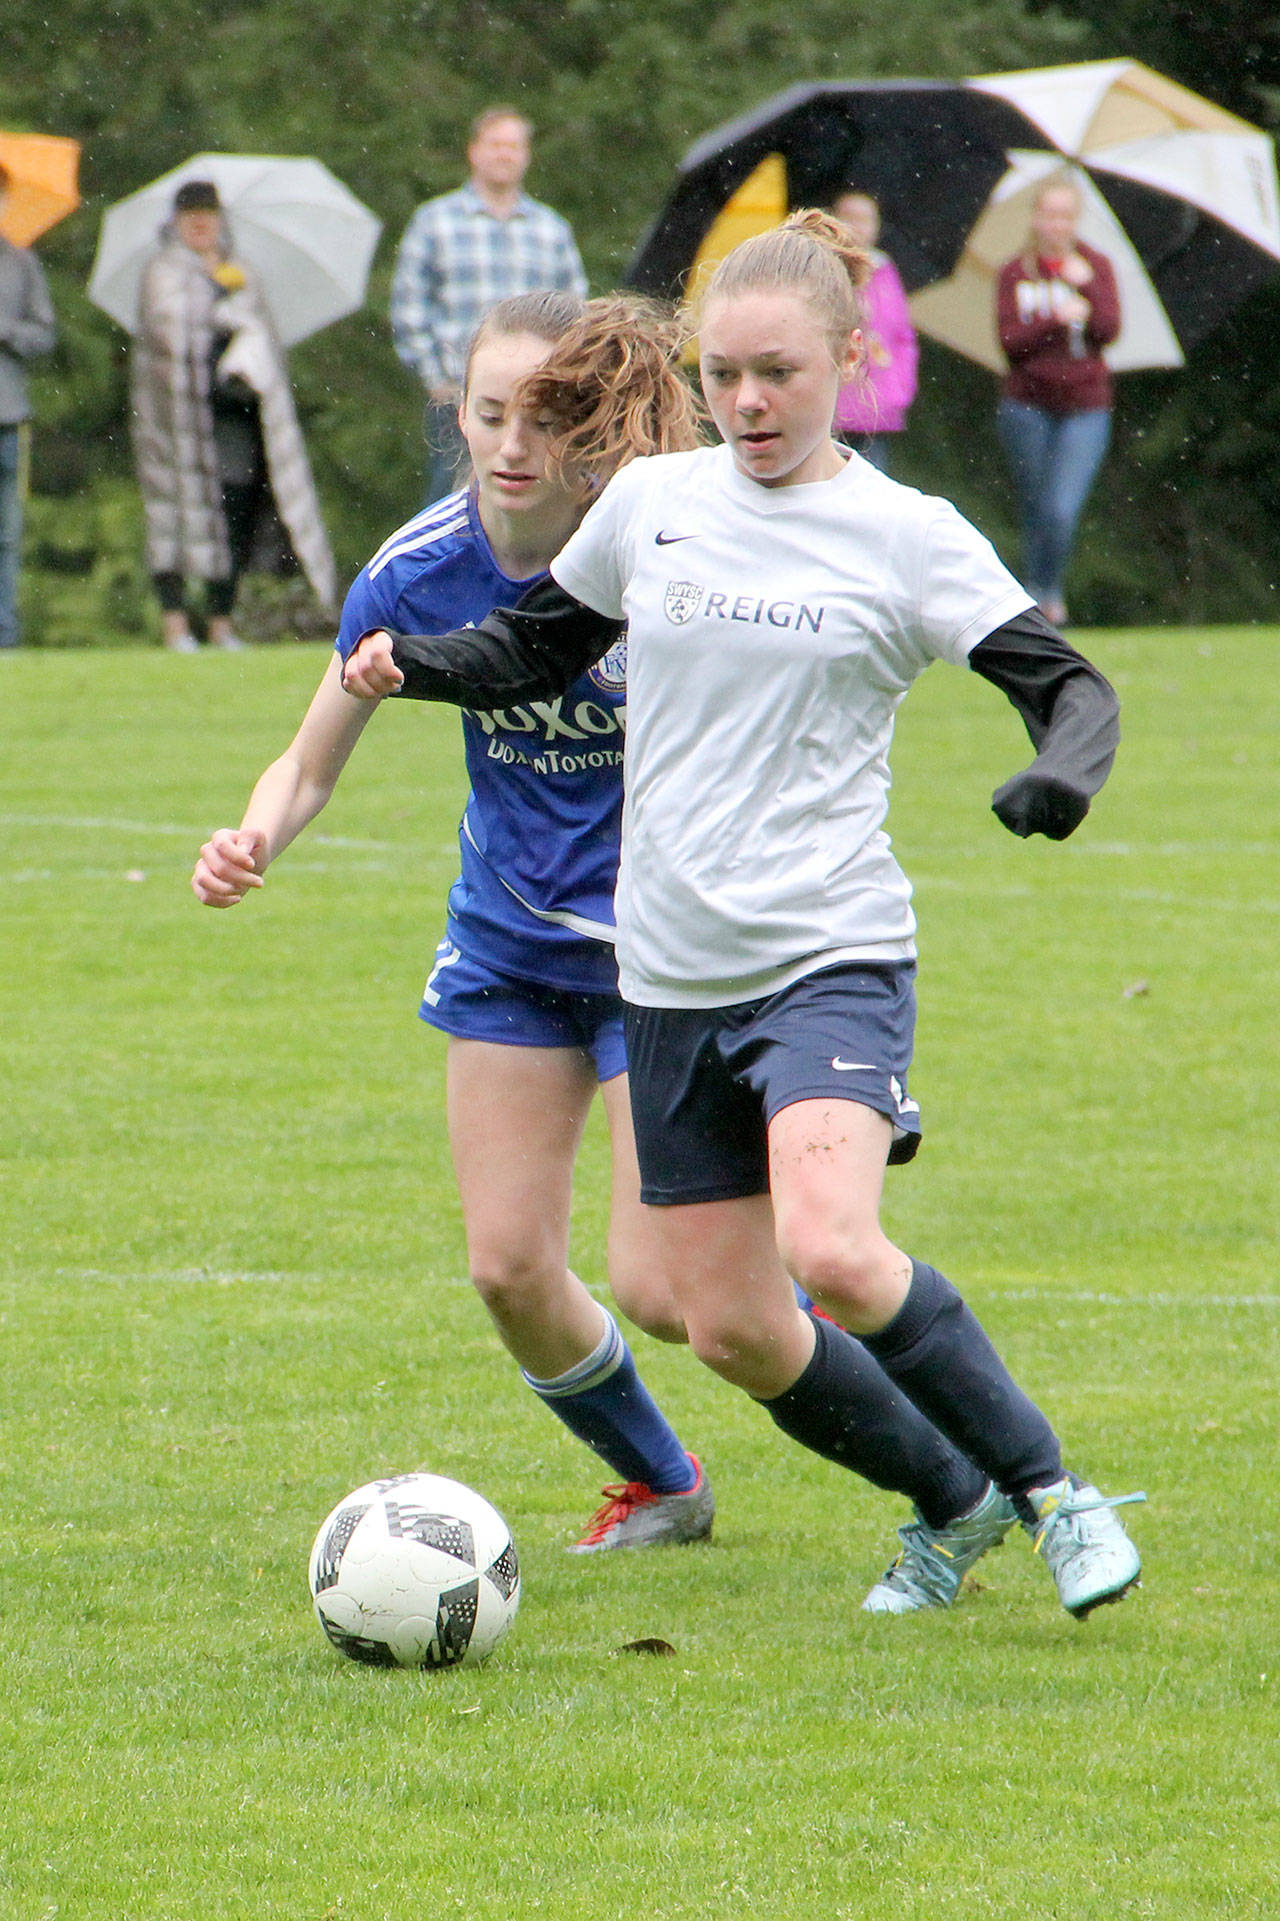 Contributed photo — South Whidbey Reign’s Mallory Drye maneuvers with the soccer ball during the Washington Youth Soccer President’s Cup.